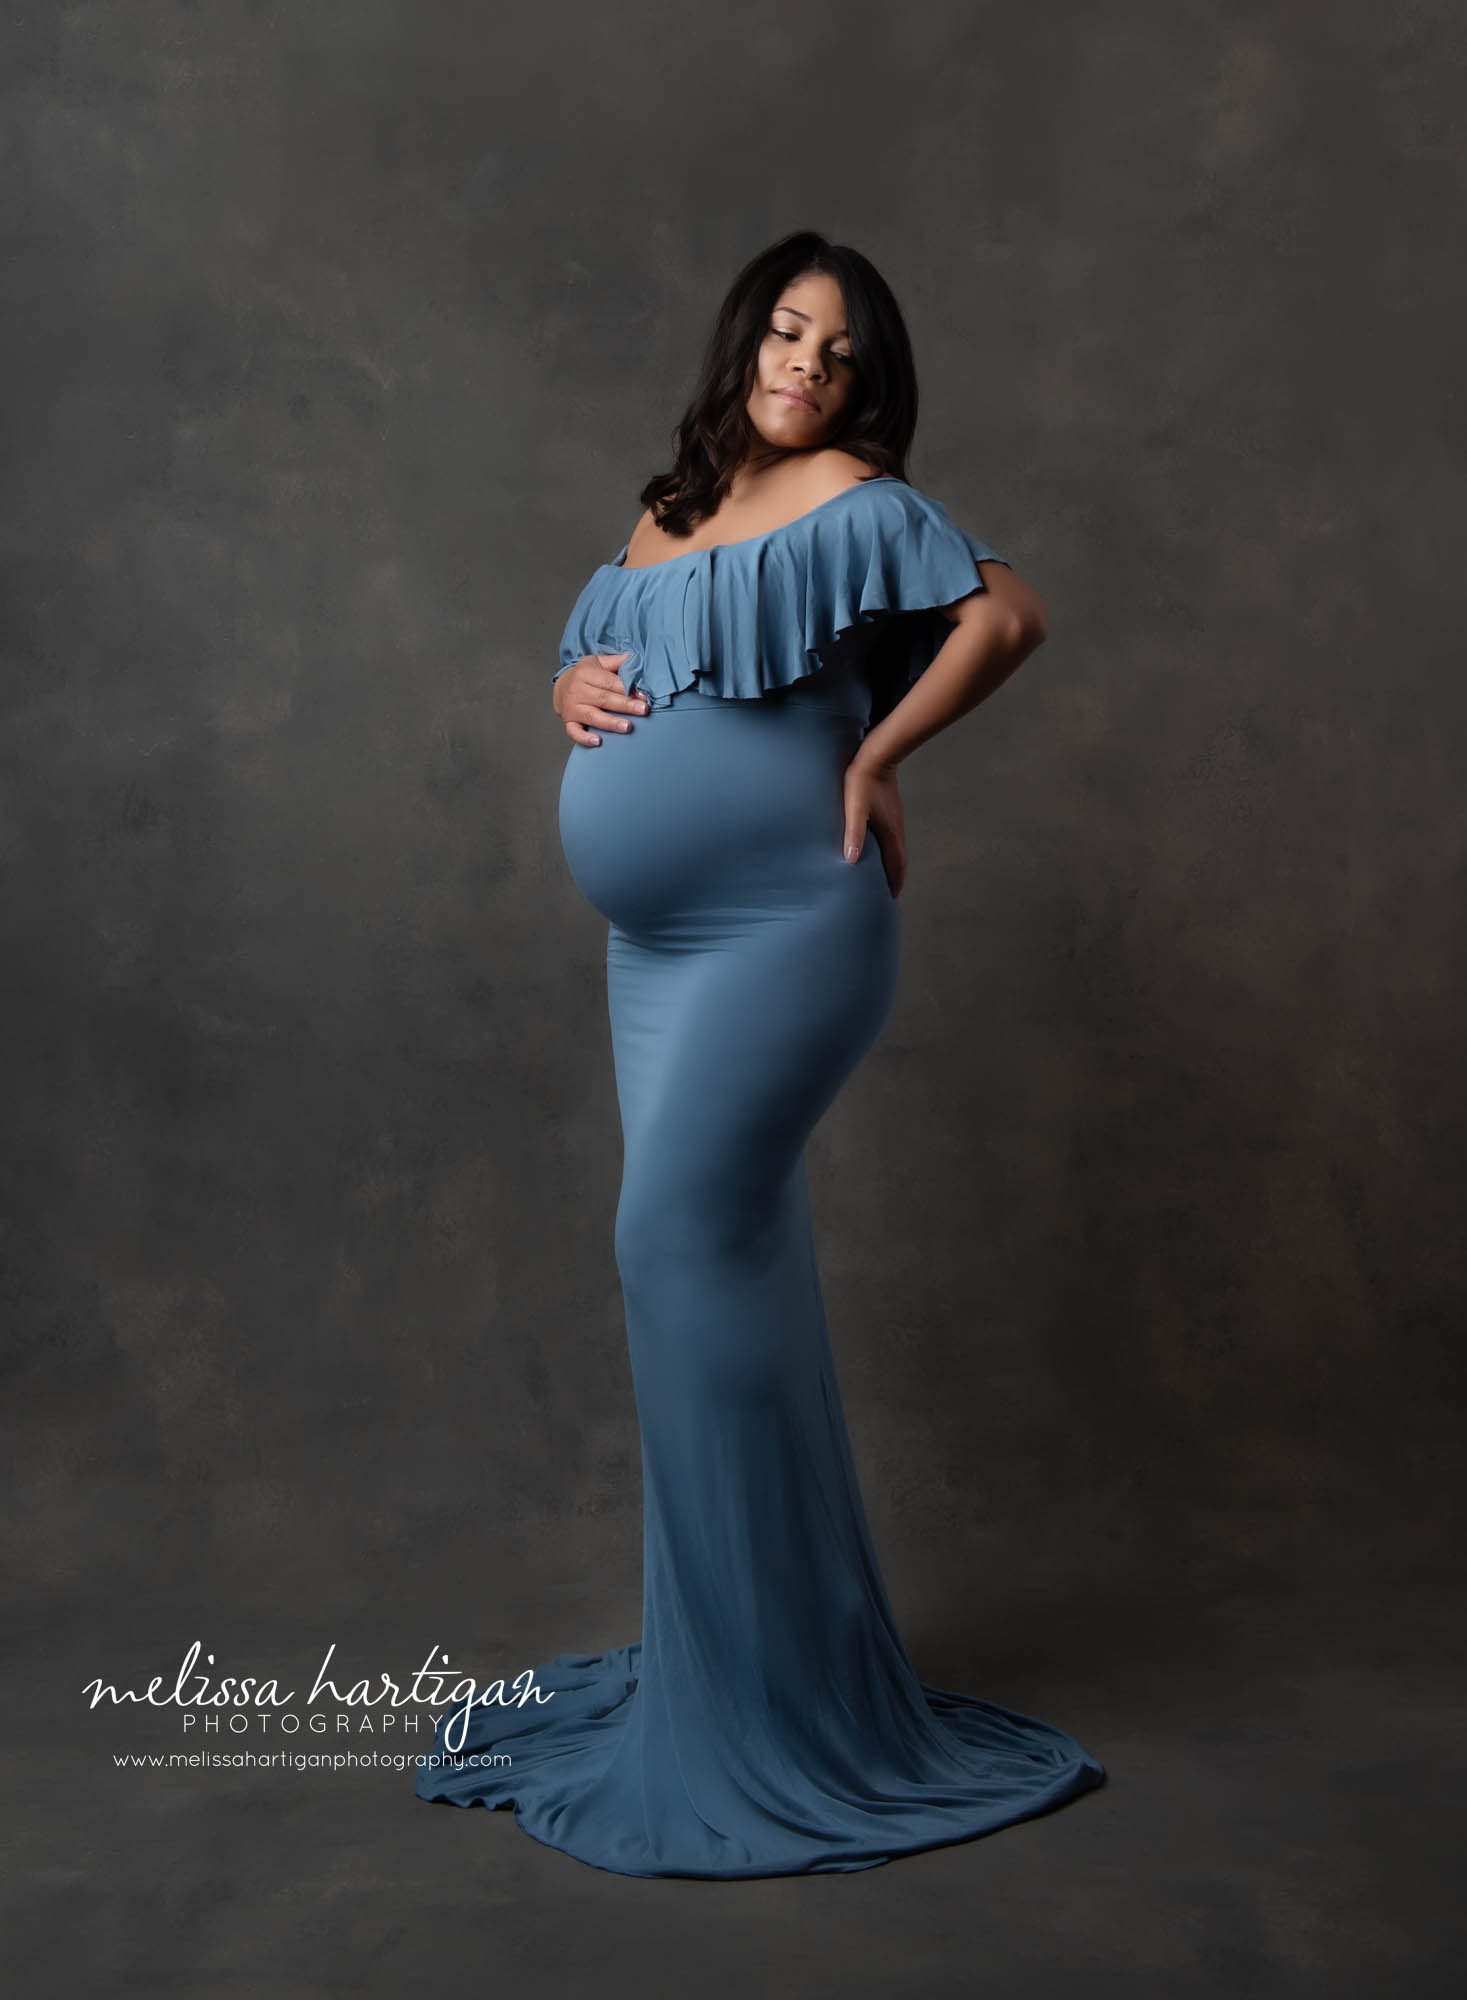 Mother to be standing in photography studio during maternity session mom wearing blue ruffled off the shoulder maternity dress